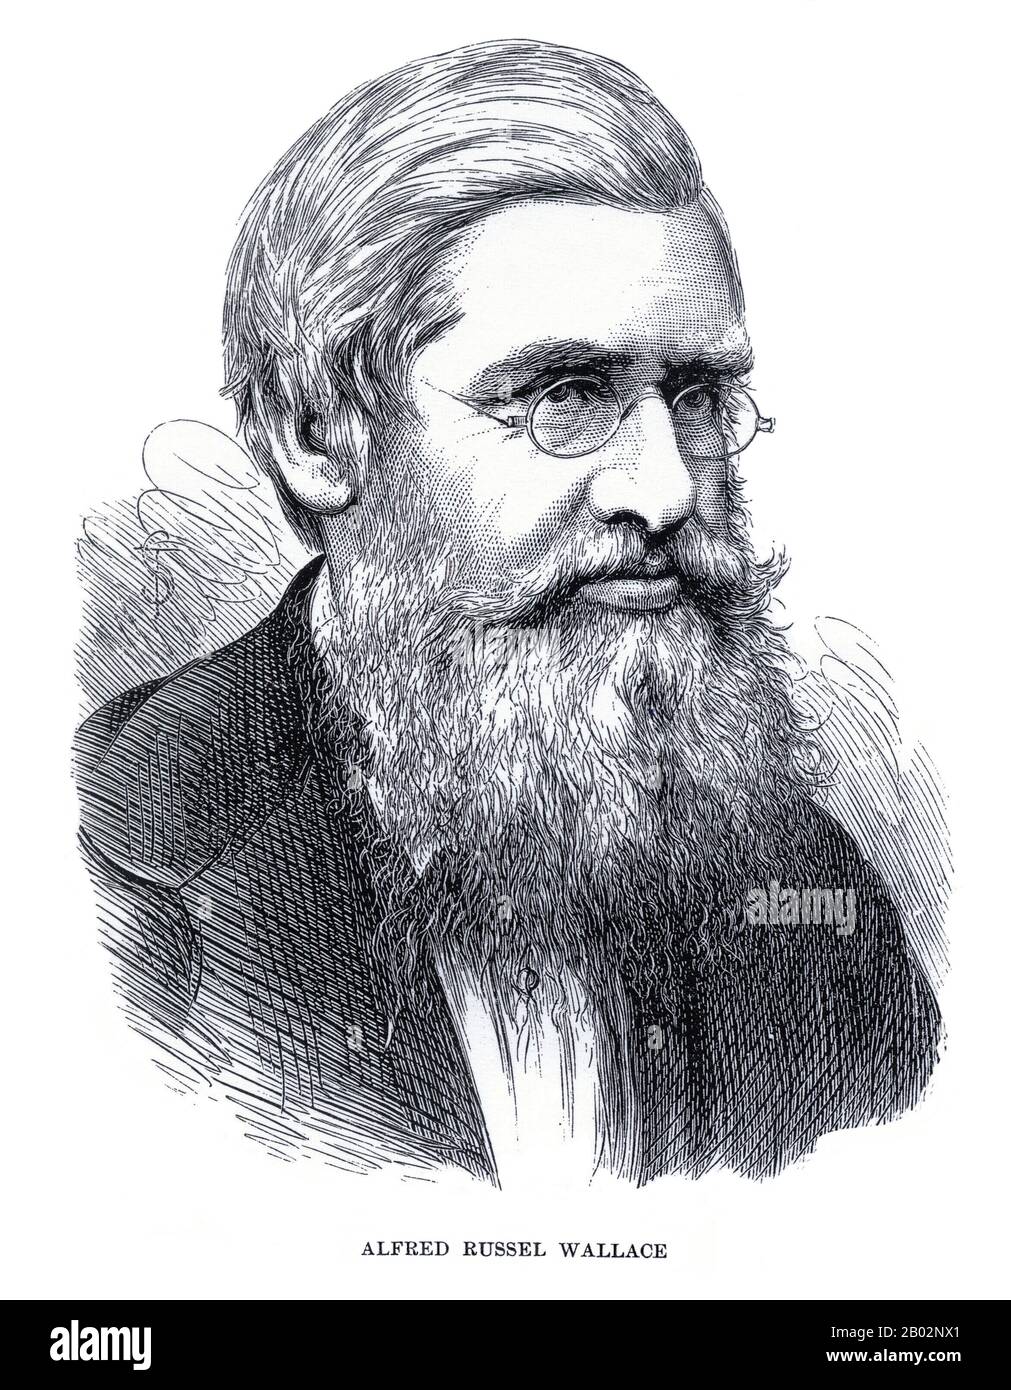 Alfred Russel Wallace OM FRS (8 January 1823 – 7 November 1913) was a British naturalist, explorer, geographer, anthropologist, and biologist. He is best known for independently conceiving the theory of evolution through natural selection; his paper on the subject was jointly published with some of Charles Darwin's writings in 1858. This prompted Darwin to publish his own ideas in On the Origin of Species.  Wallace did extensive fieldwork, first in the Amazon River basin and then in the Malay Archipelago, where he identified the faunal divide now termed the Wallace Line, which separates the In Stock Photo